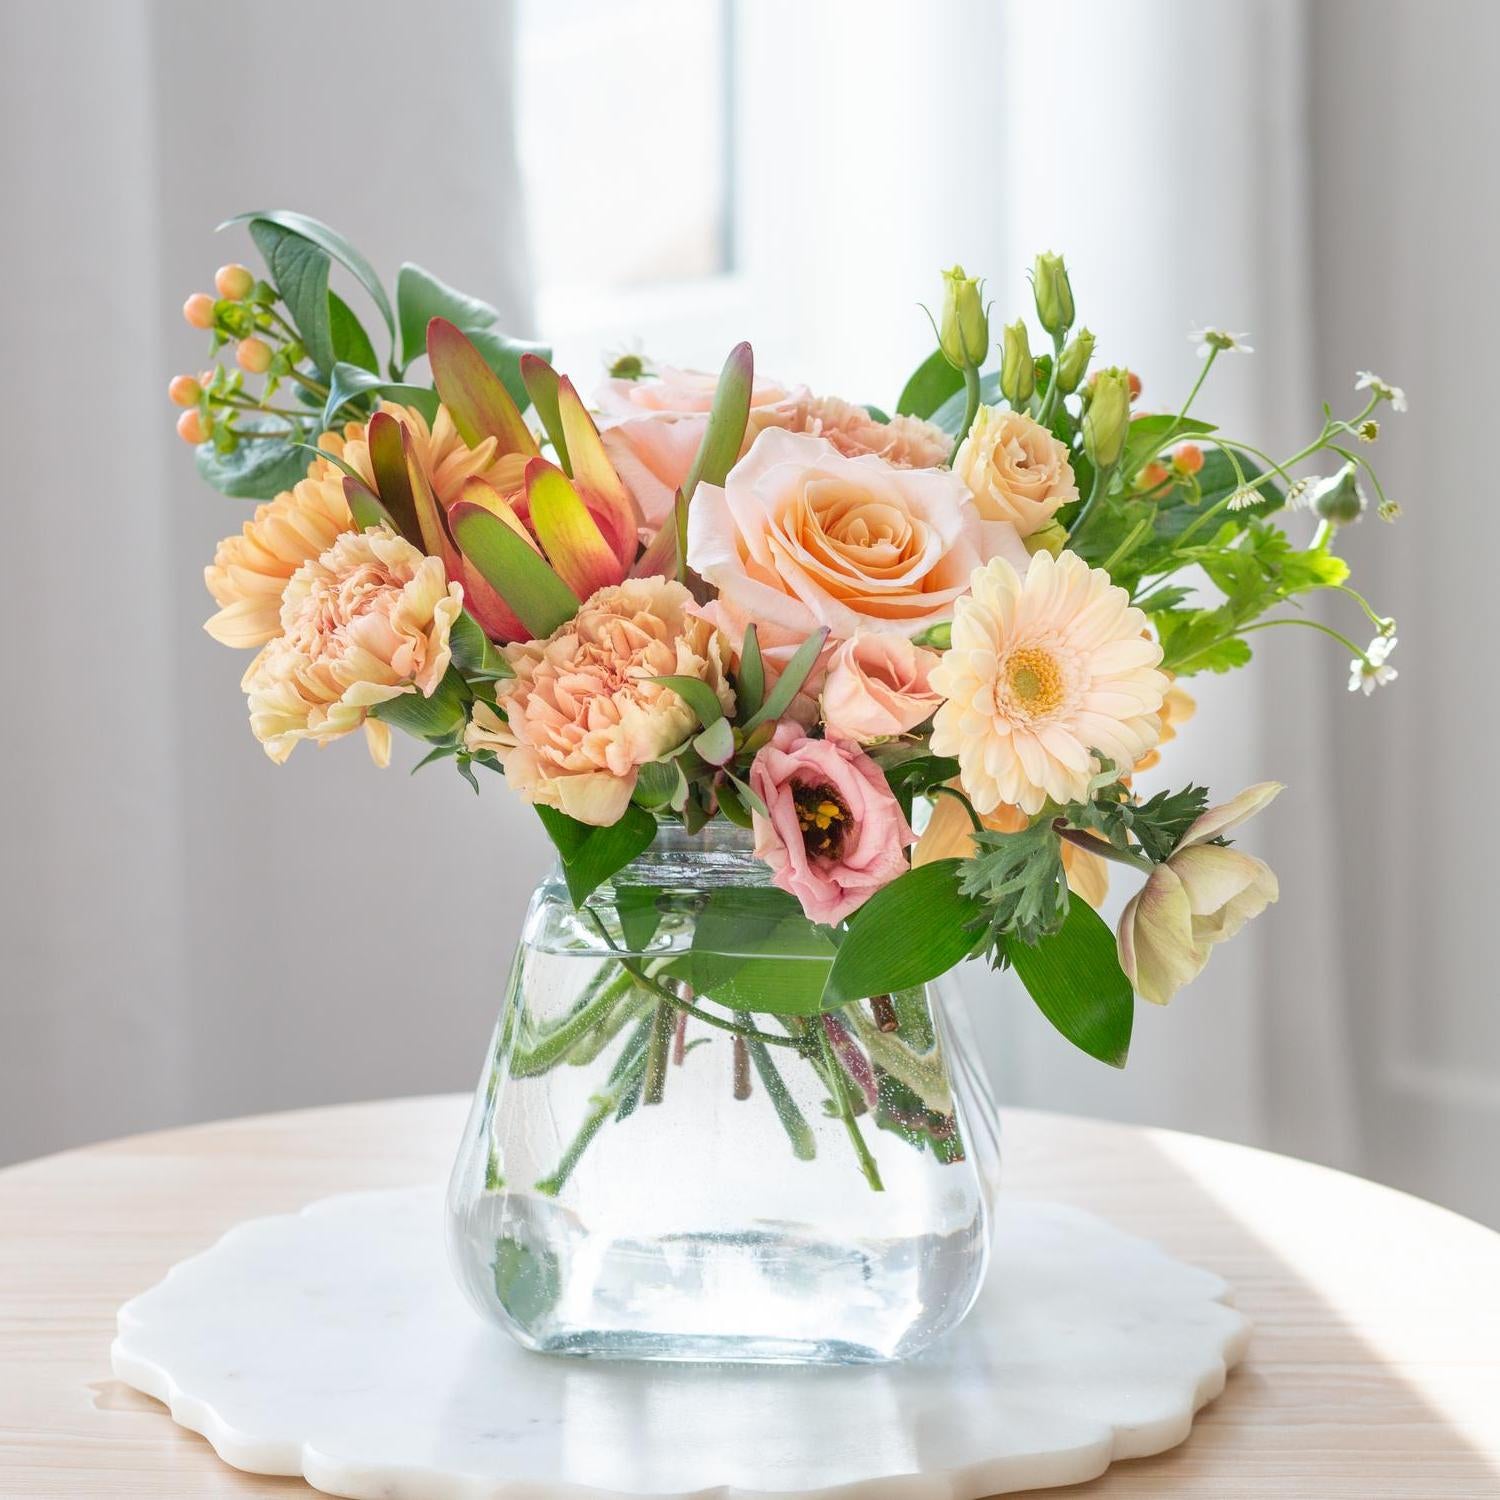 Small Rosie Posie square glass vase showcasing a mix of blush pink and coral flowers, including roses and hydrangeas, on a white surface with soft lighting.